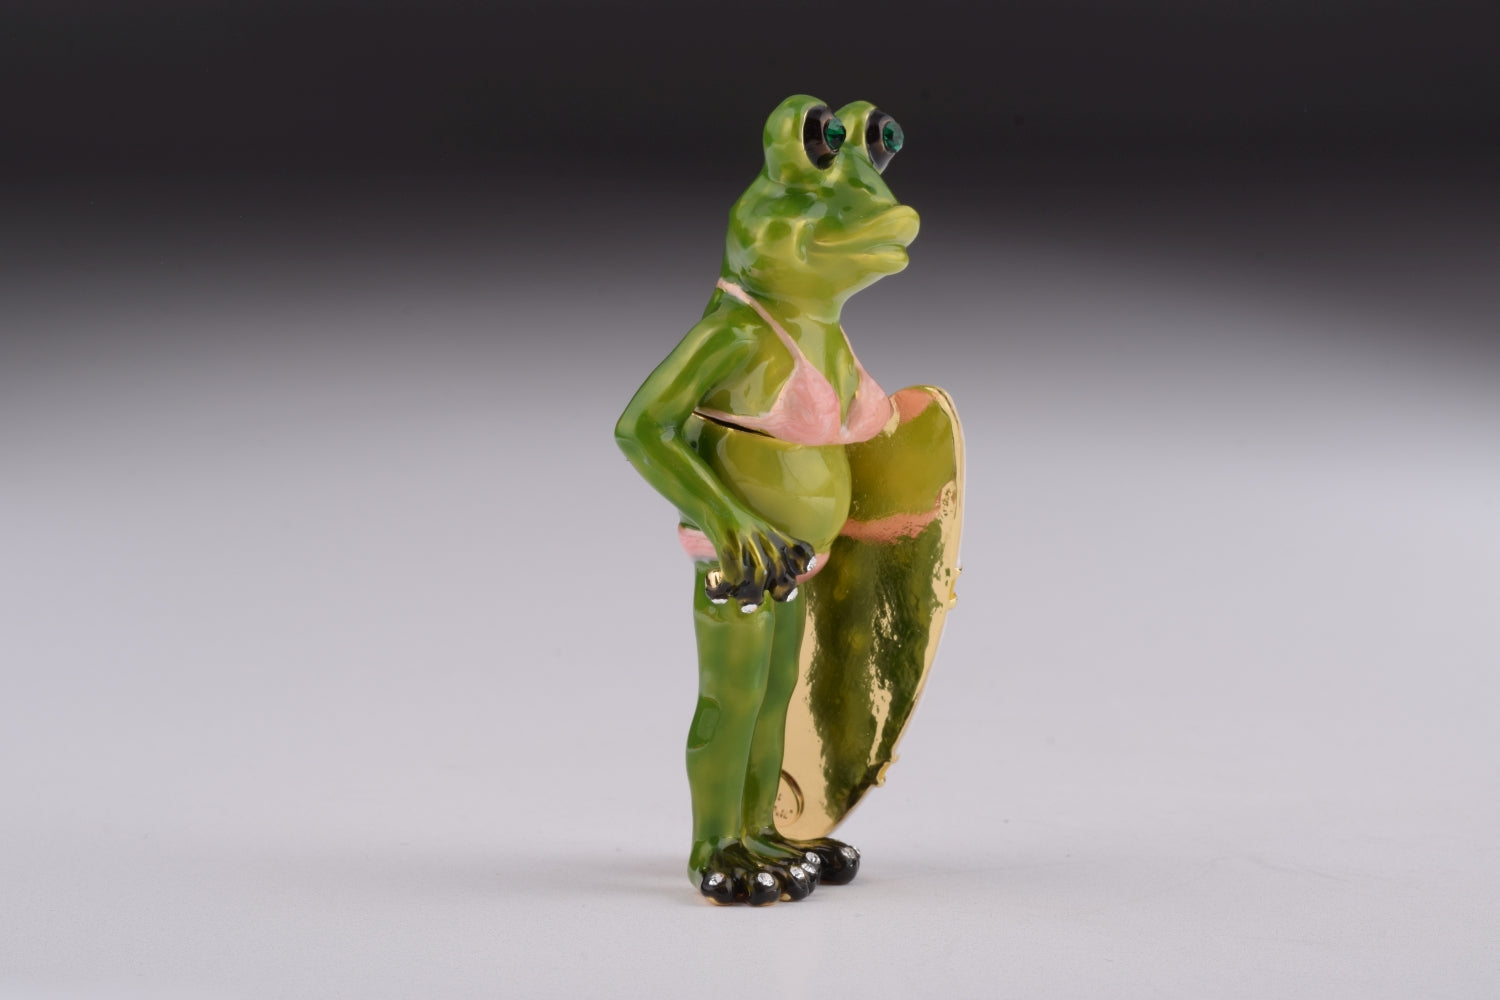 Frog Holding a Surfboard